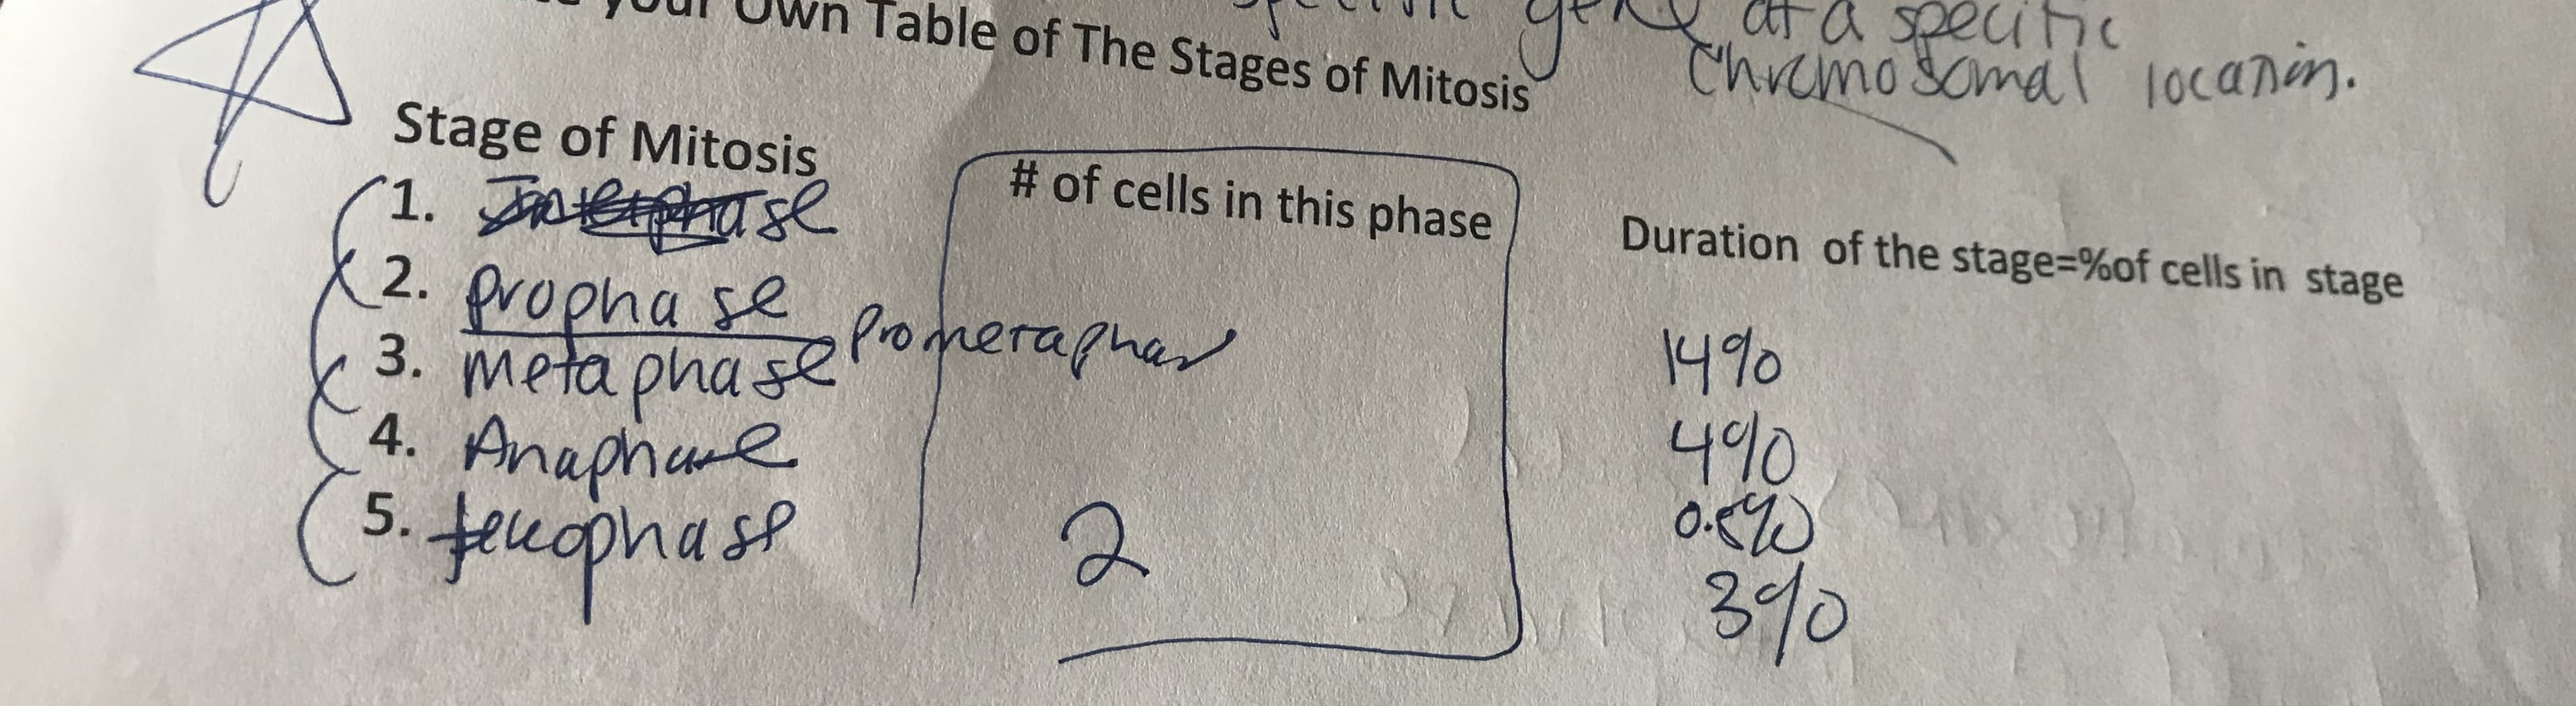 of Mitosis
Somal locann.
Stage of Mitosis
1. AEse
fropha se
3. meta pha seoneraphan
4. Anaphane
5.
# of cells in this phase
Duration of the stage=%of cells in stage
2.
14%
4%0
fece
nase
30
